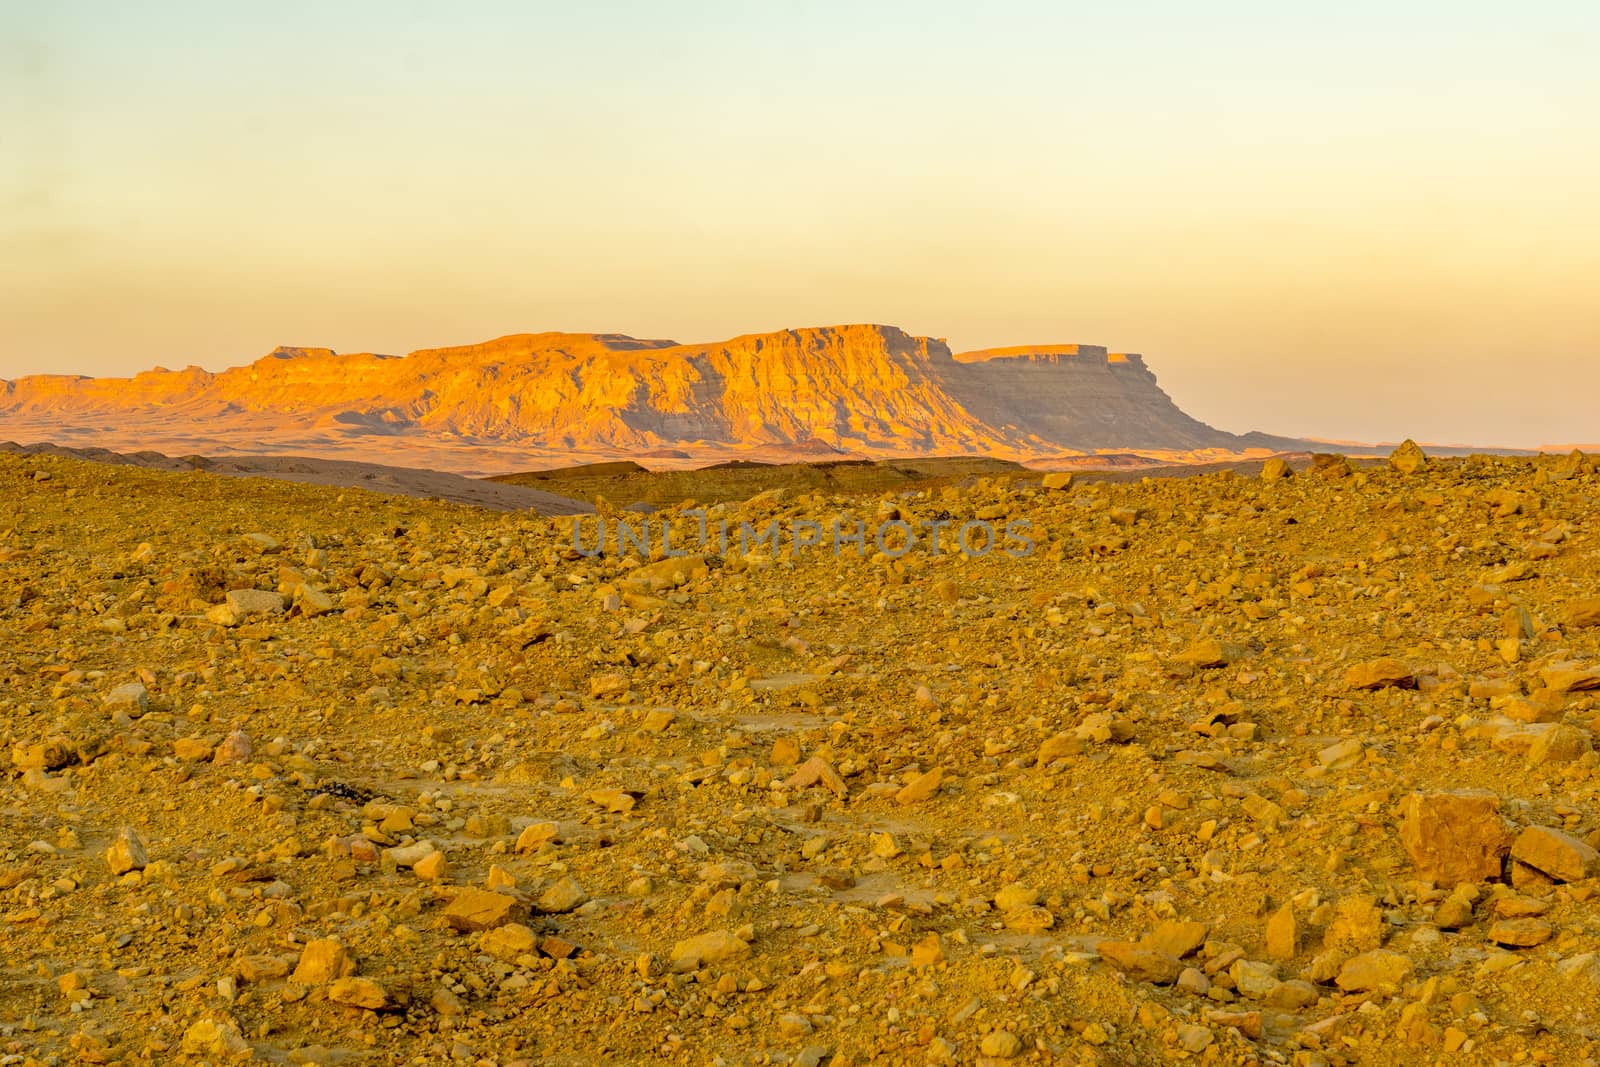 Sunset view towards Mount Ardon, in Makhtesh (crater) Ramon, the Negev Desert, Southern Israel